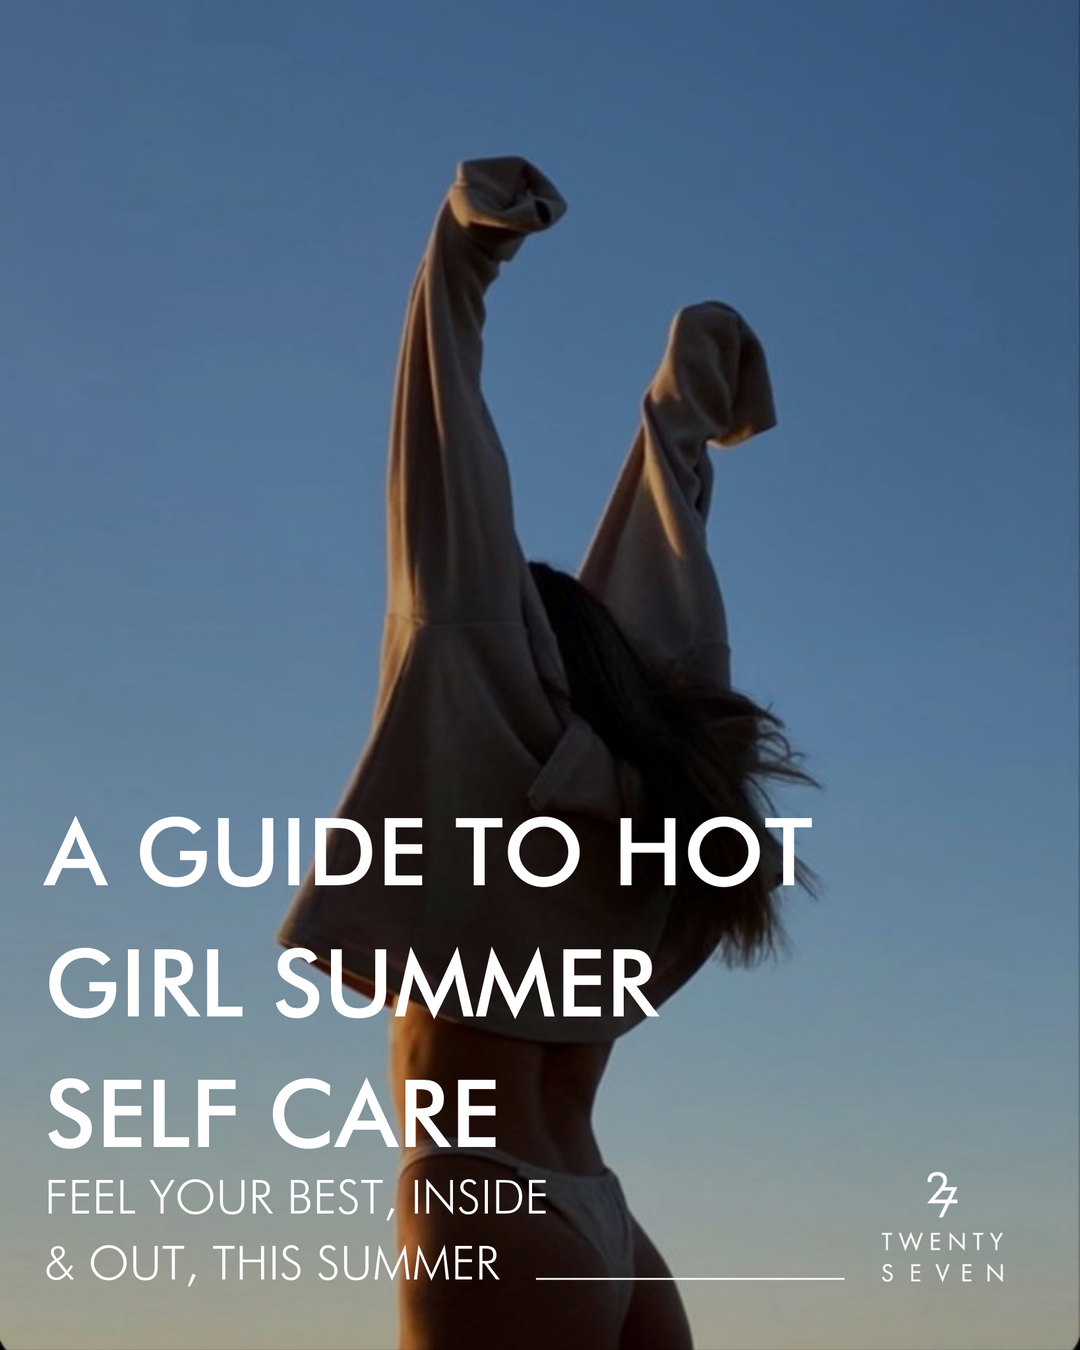 A Guide to Hot Girl Summer Self Care